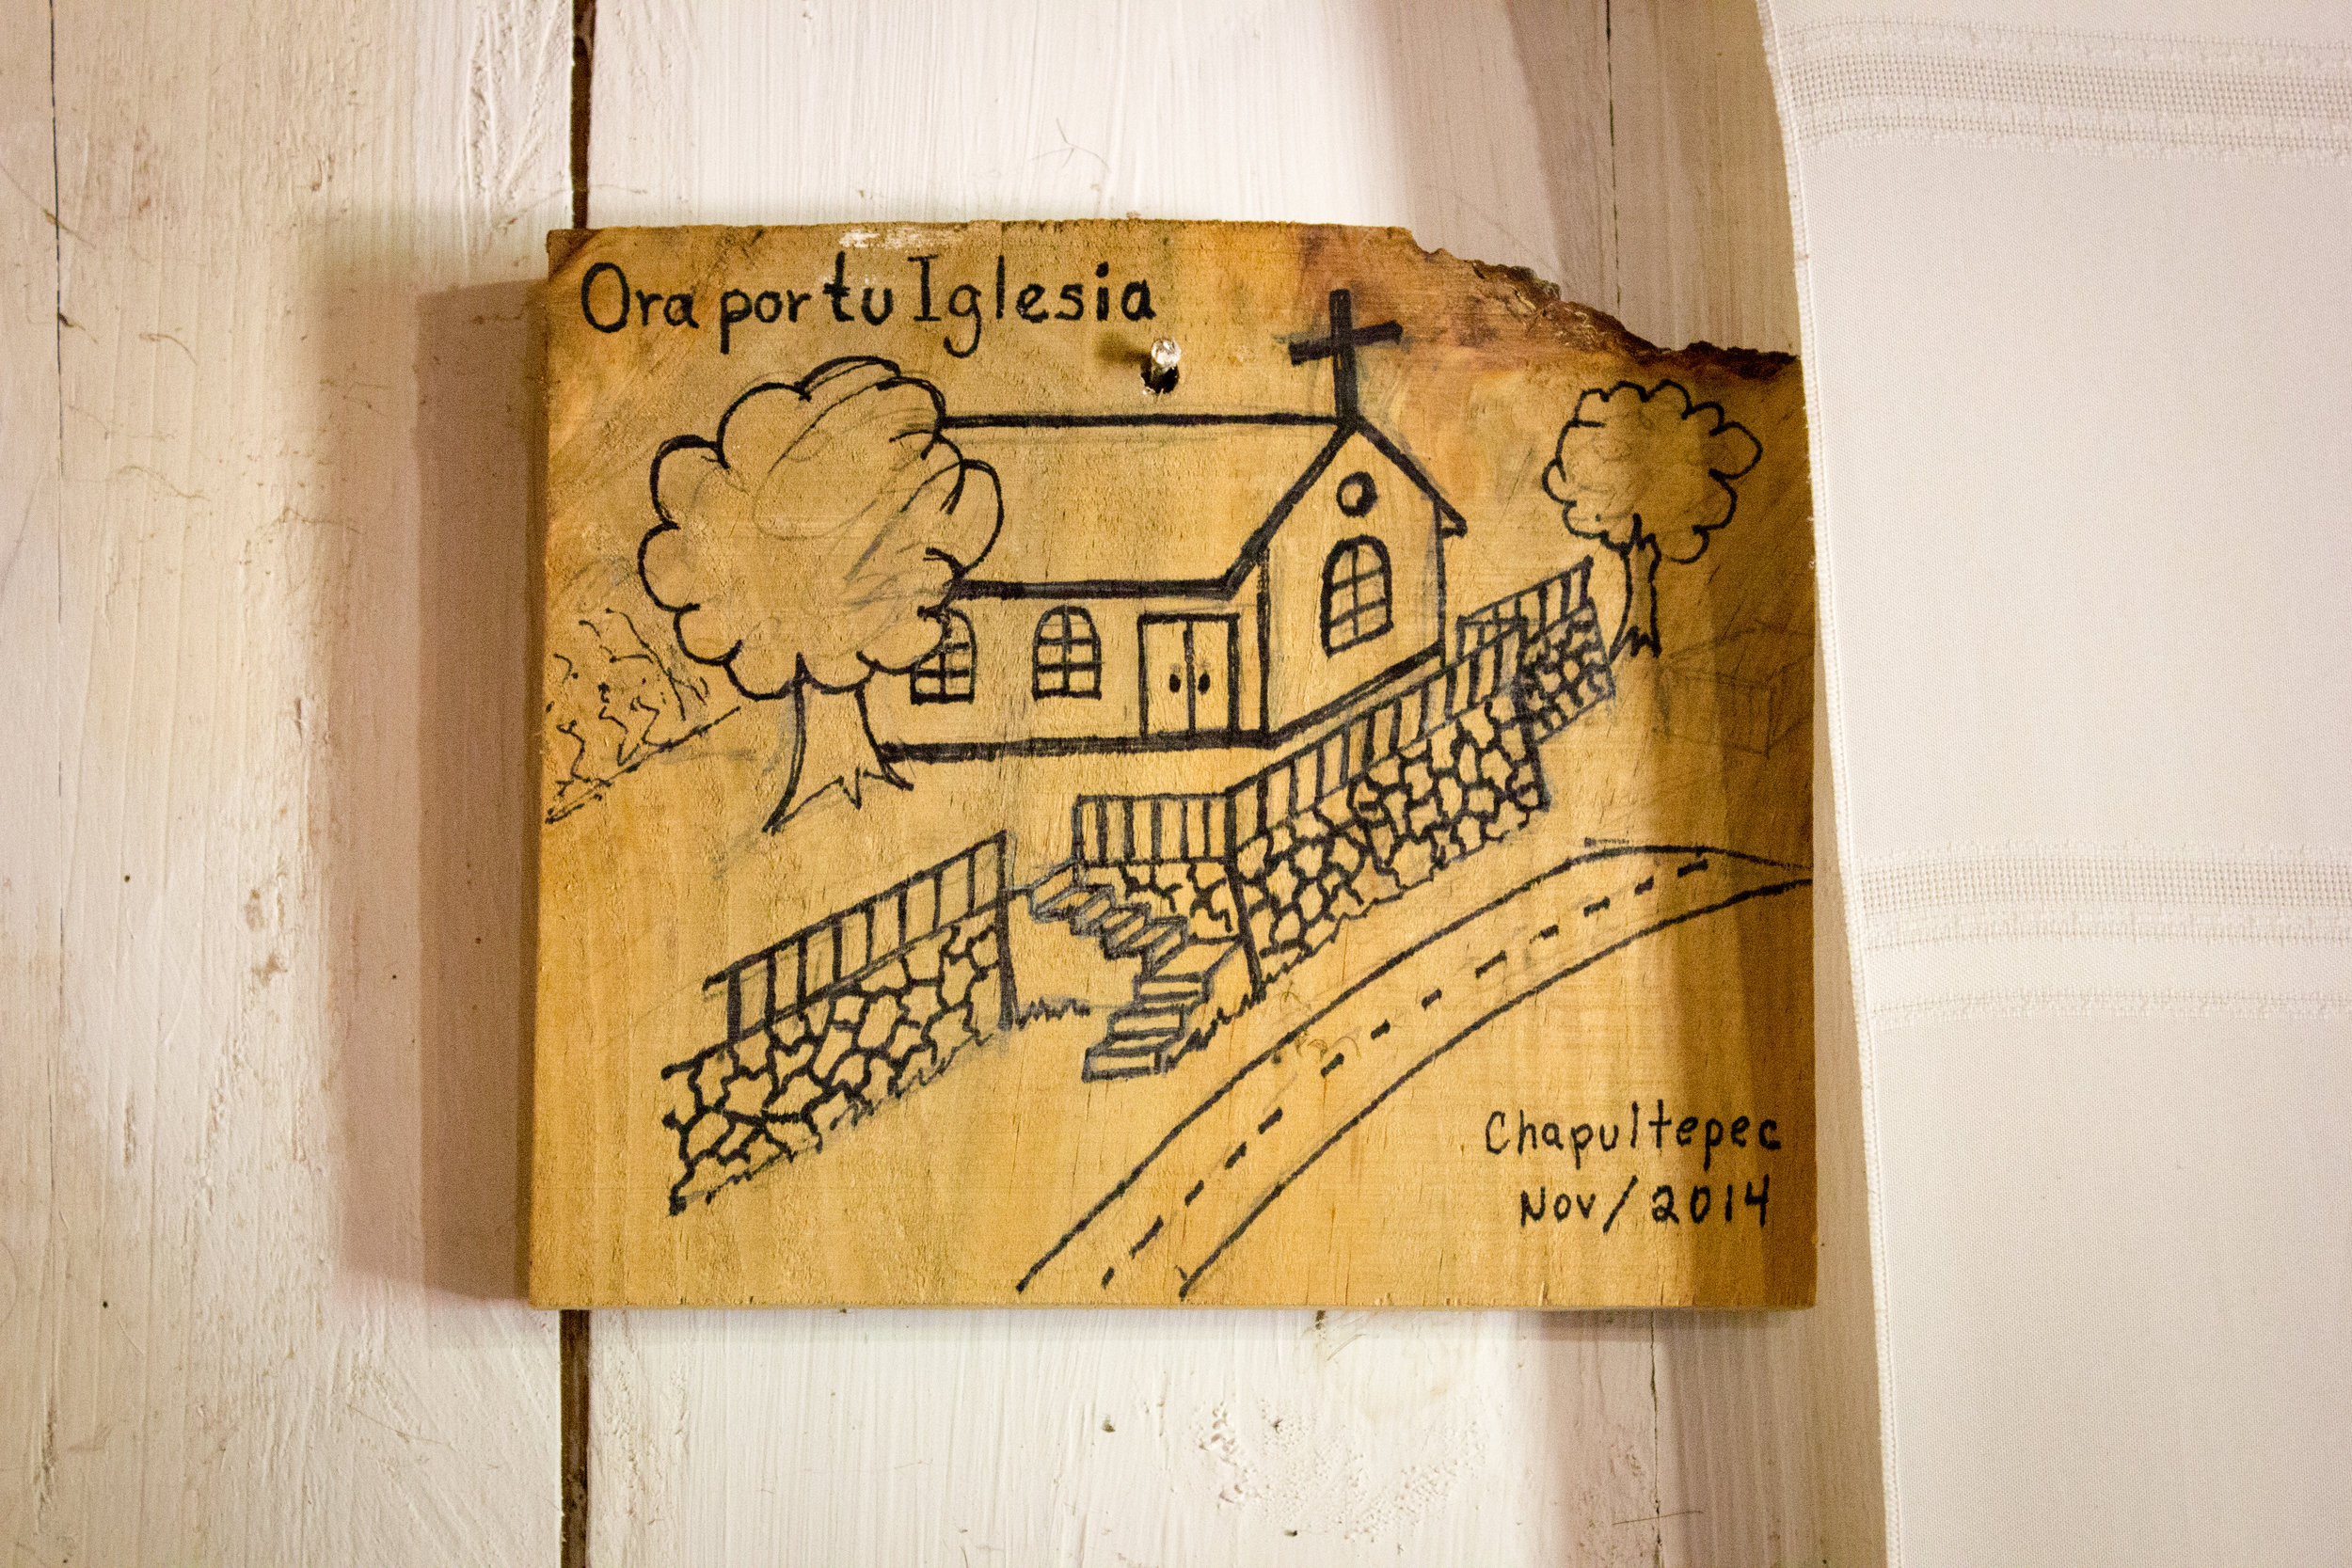  On the wall is a drawing that represents their dream of building a new church. 